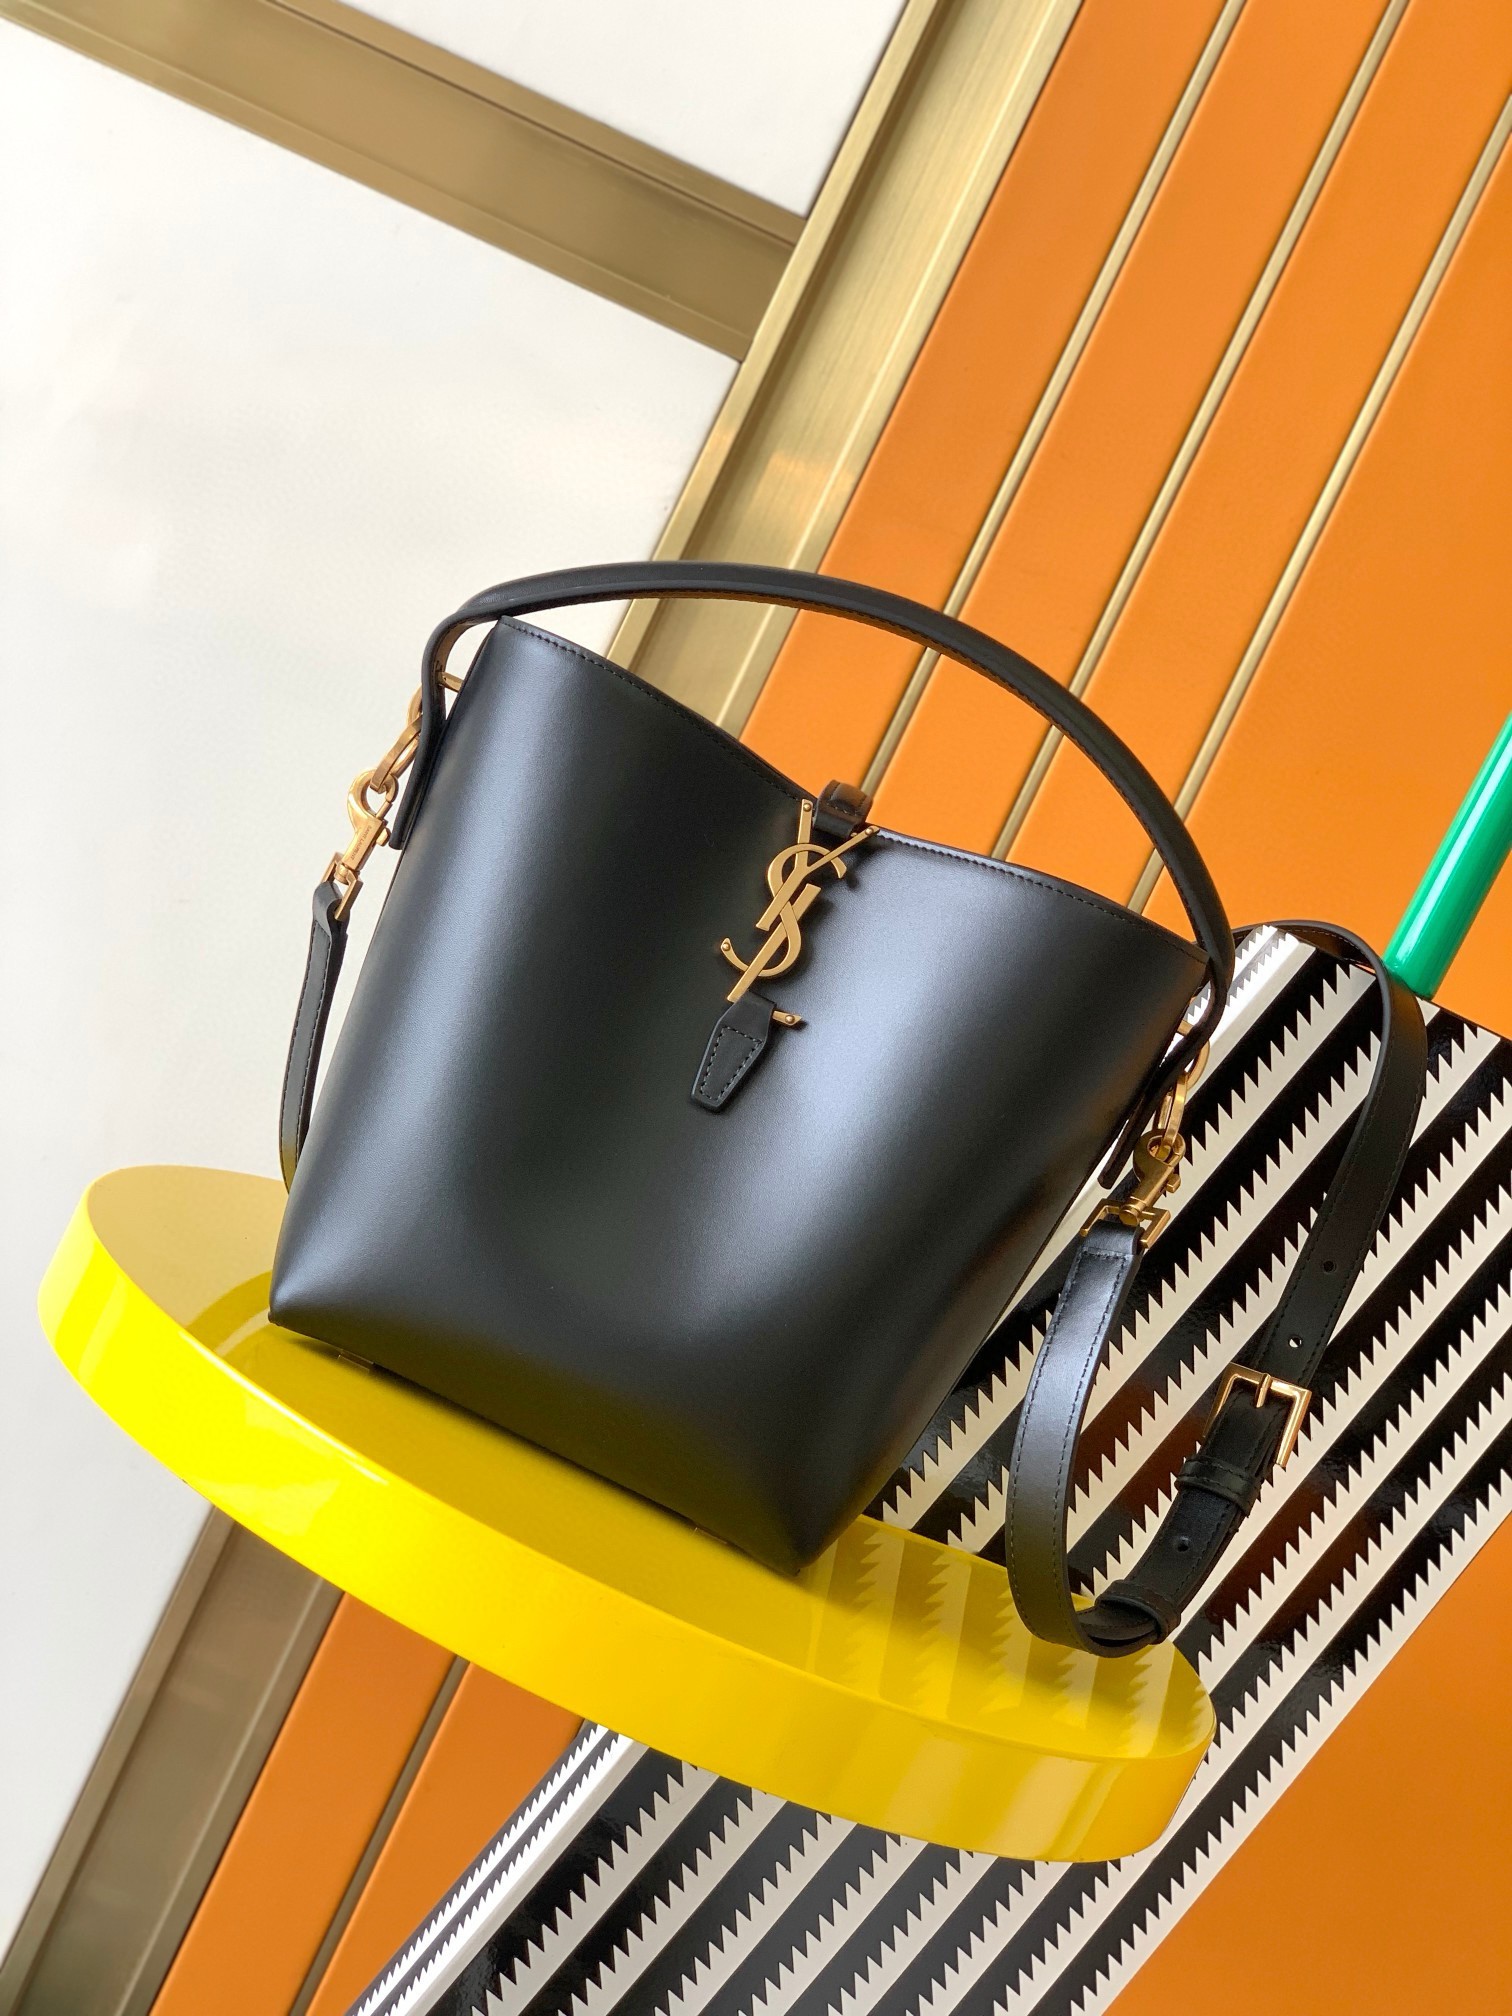 Le 37 Small Leather Bucket Bag in Black - Saint Laurent